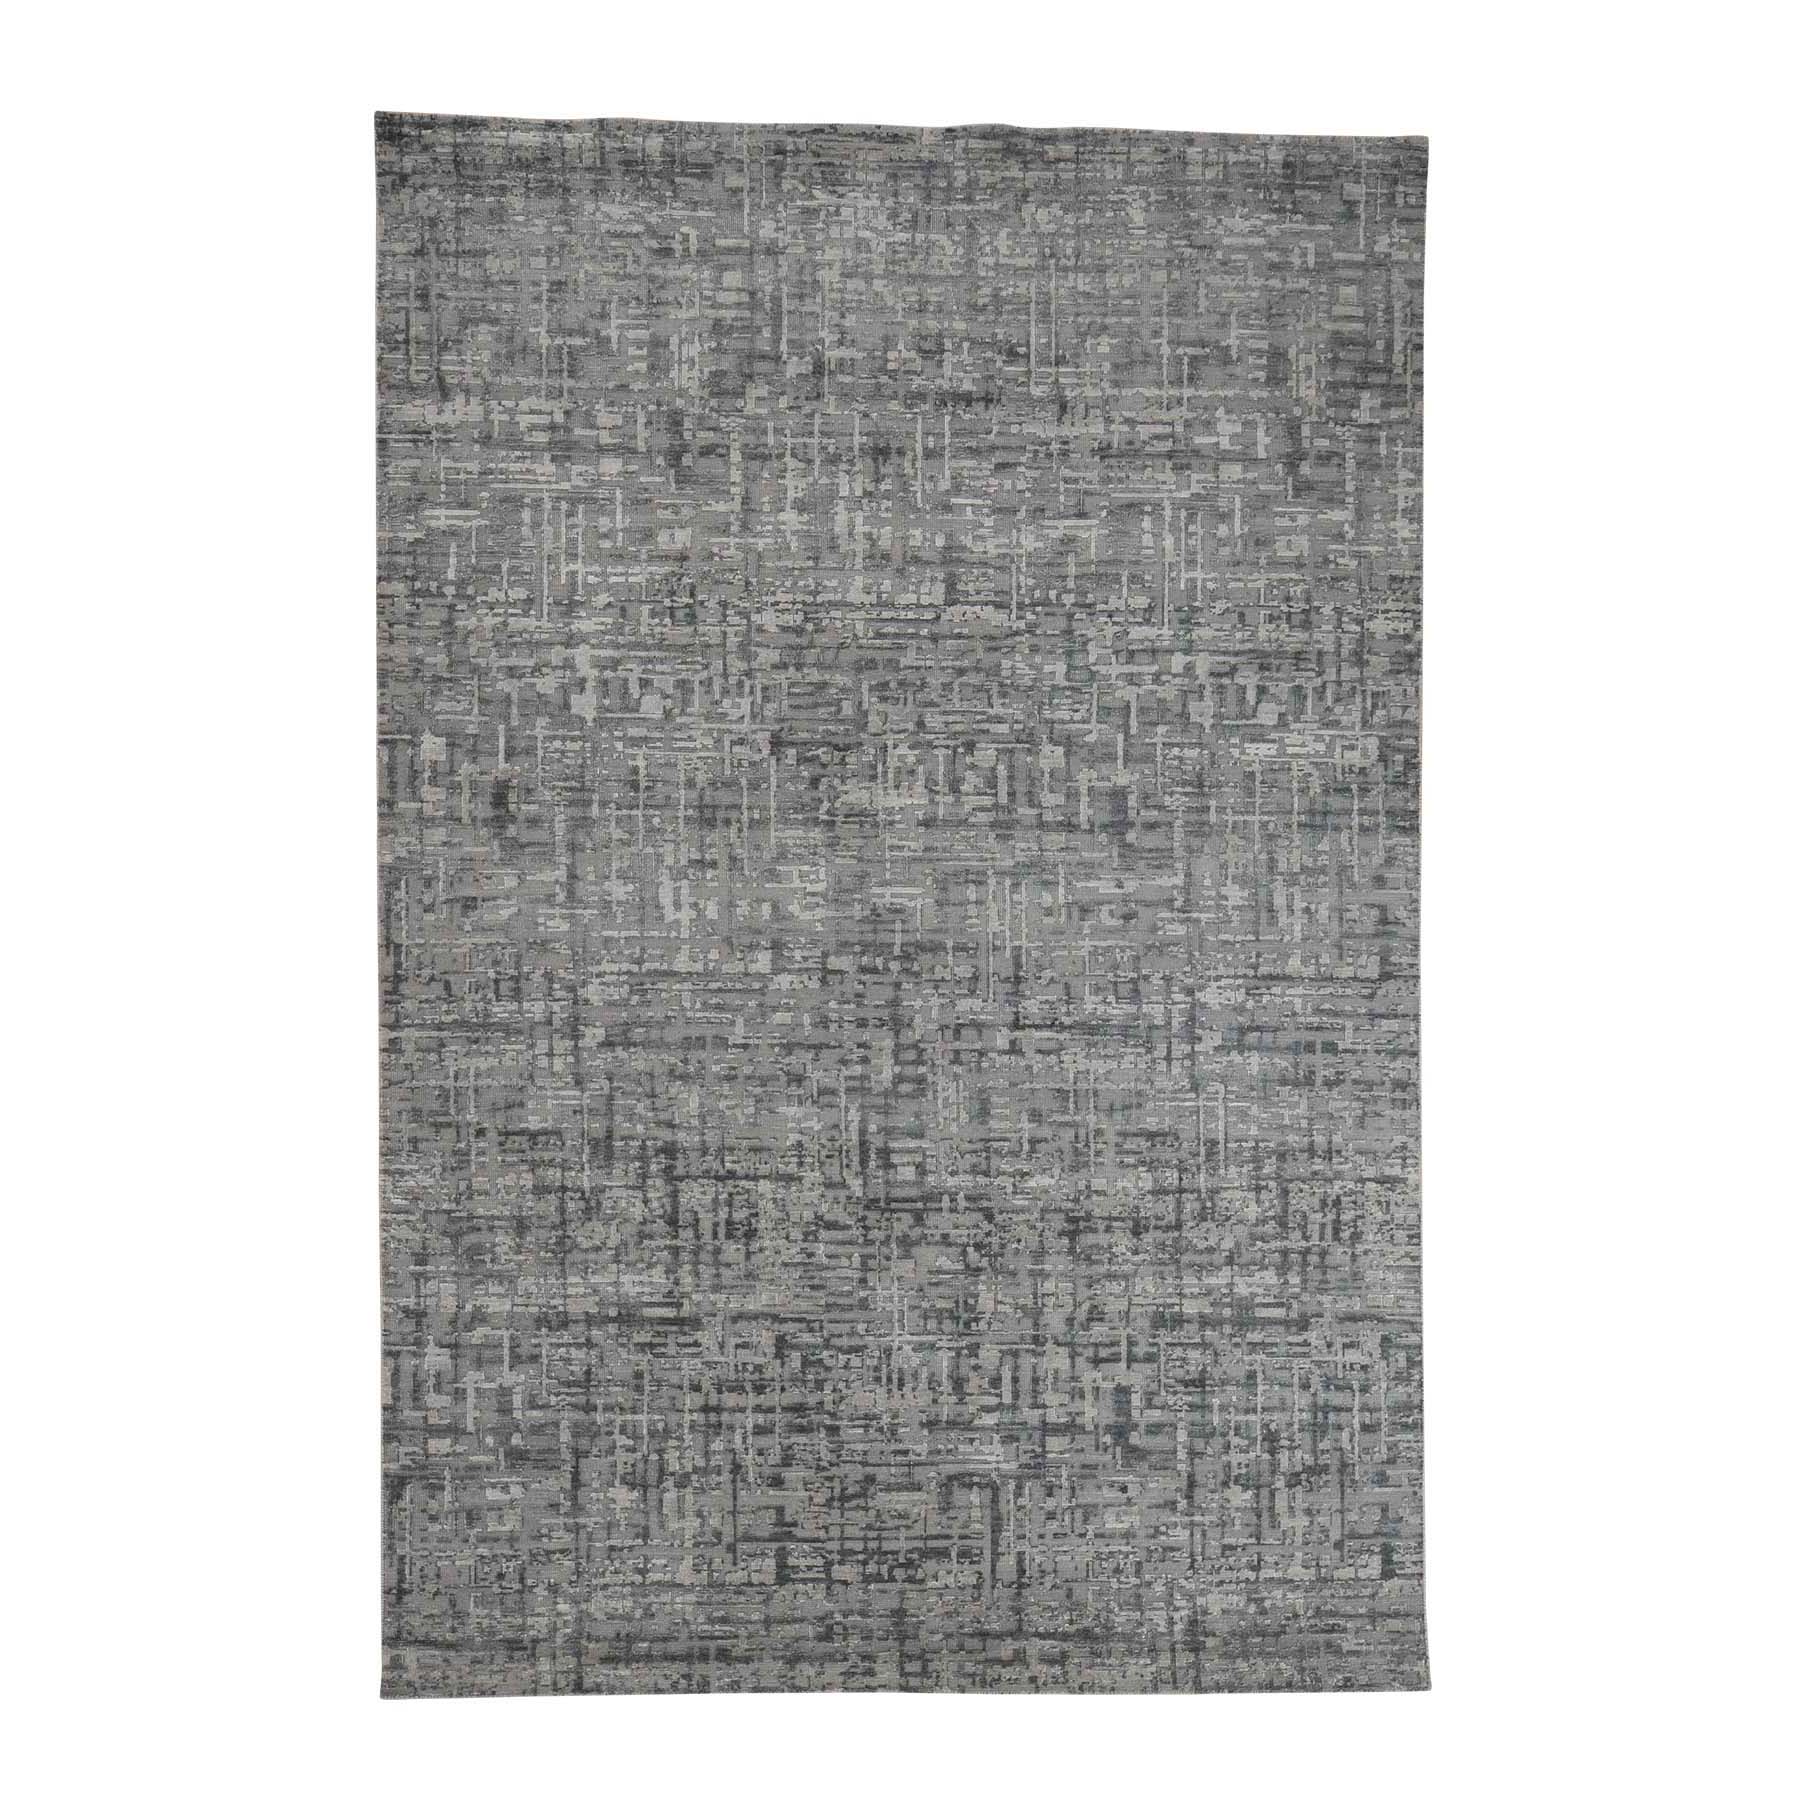 6'2"x9'3" THE MATRIX Pure Silk with Textured Wool Tone on Tone Hand Woven Rug 